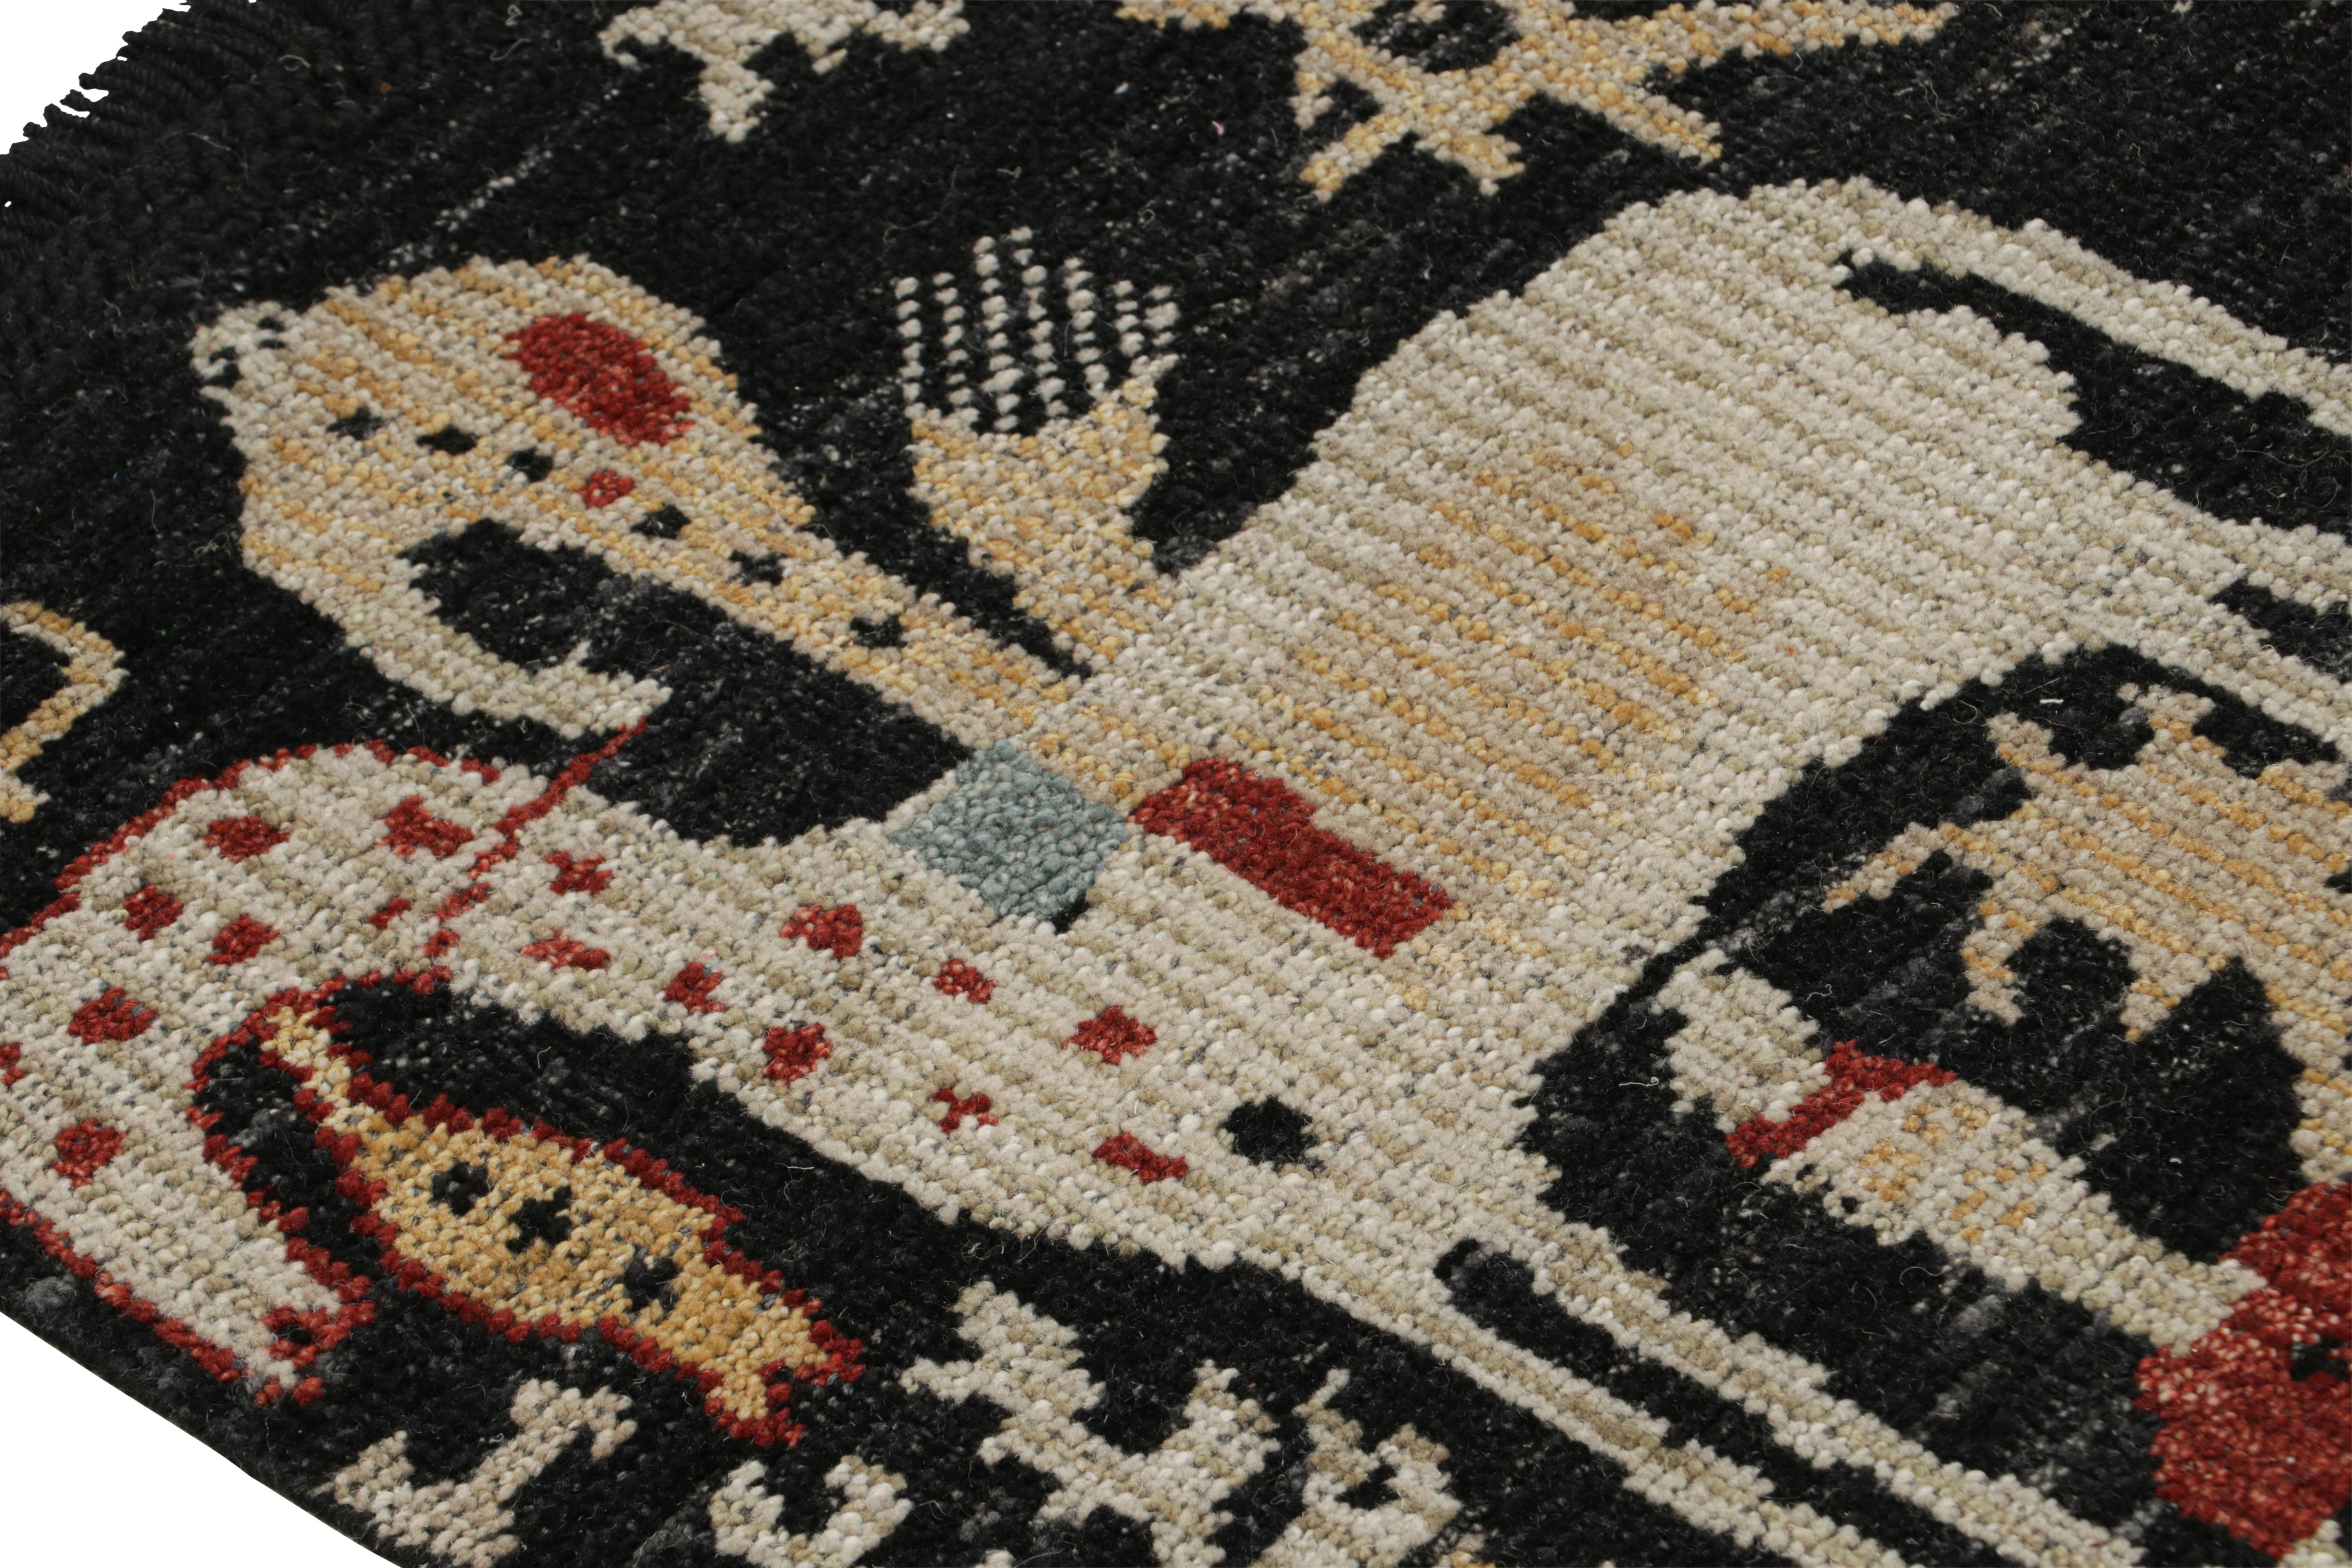 Hand-Knotted Rug & Kilim’s Caucasian-Style Rug in Black with Horseback Rider Pictorials For Sale